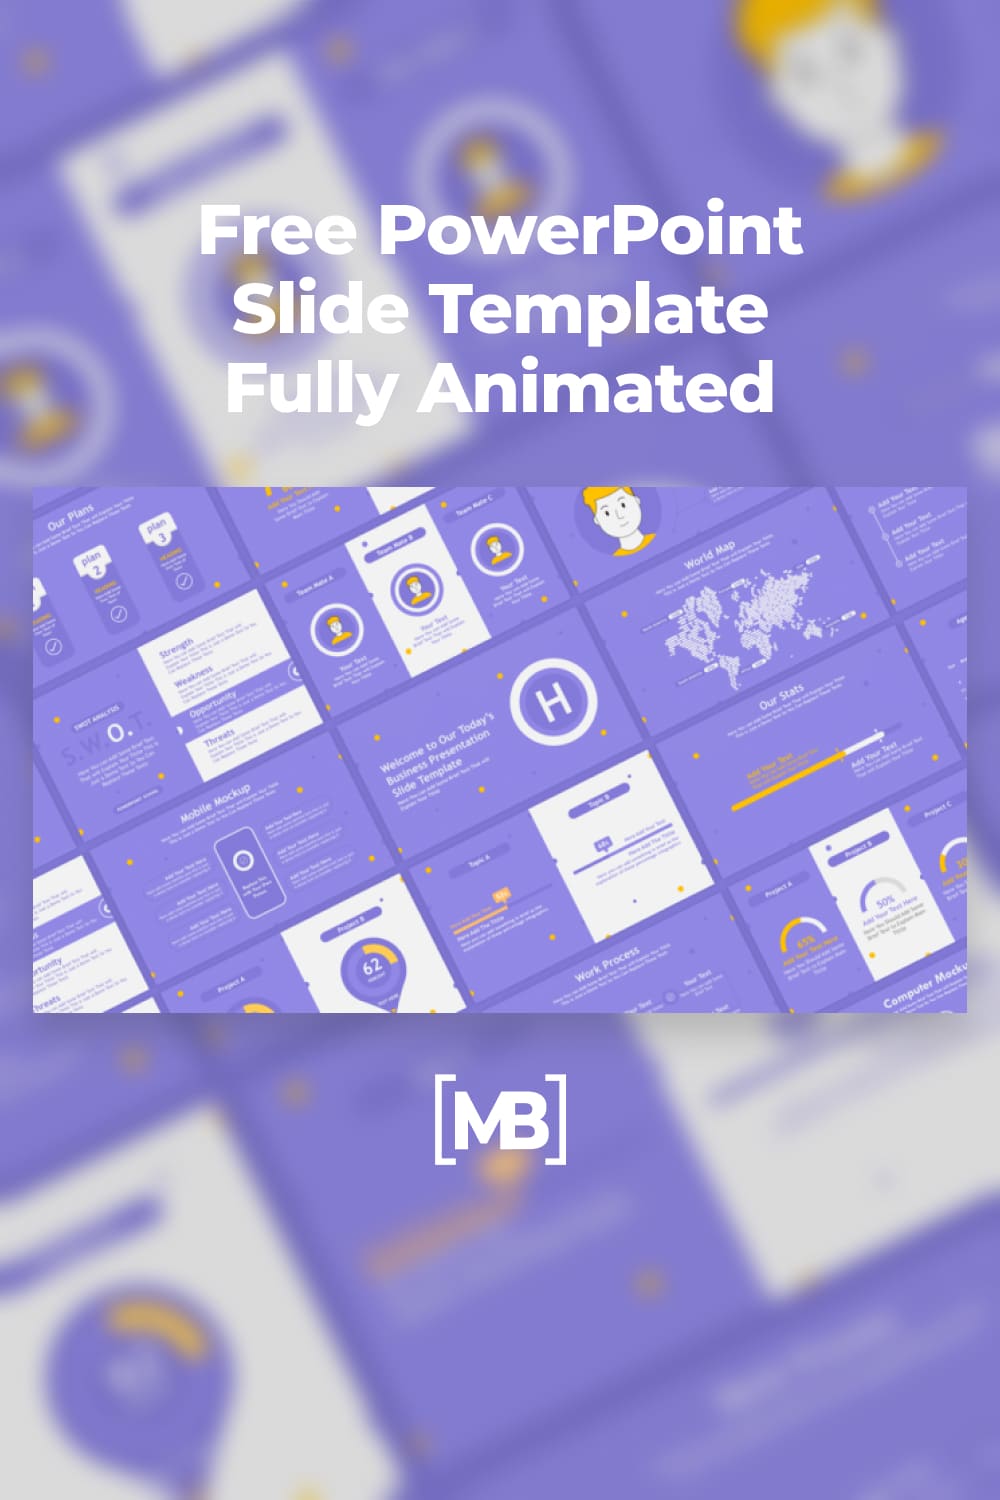 Free powerpoint slide template fully animated.